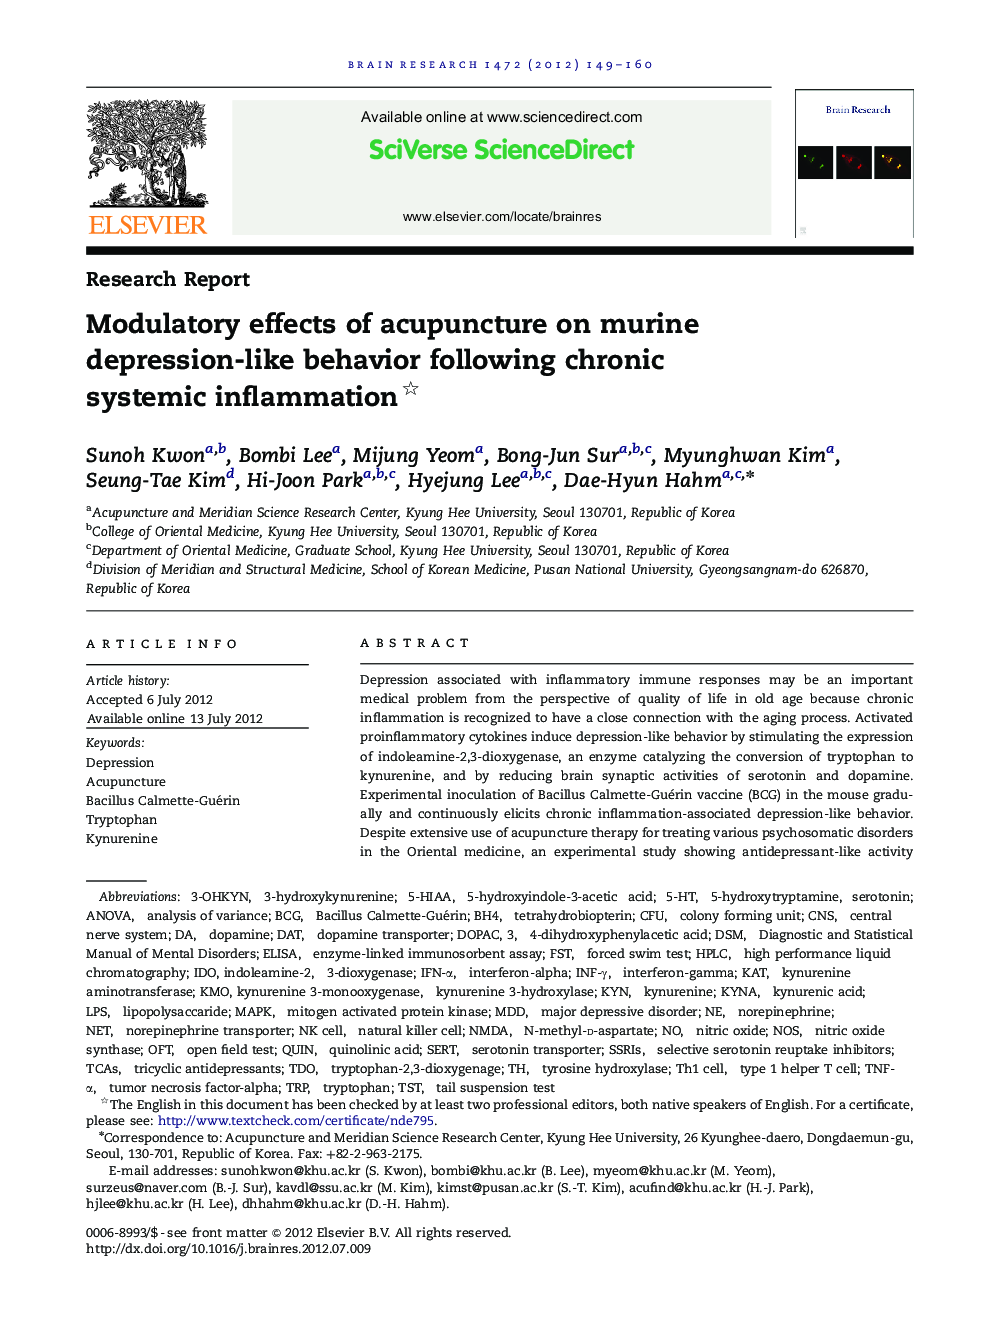 Research ReportModulatory effects of acupuncture on murine depression-like behavior following chronic systemic inflammation